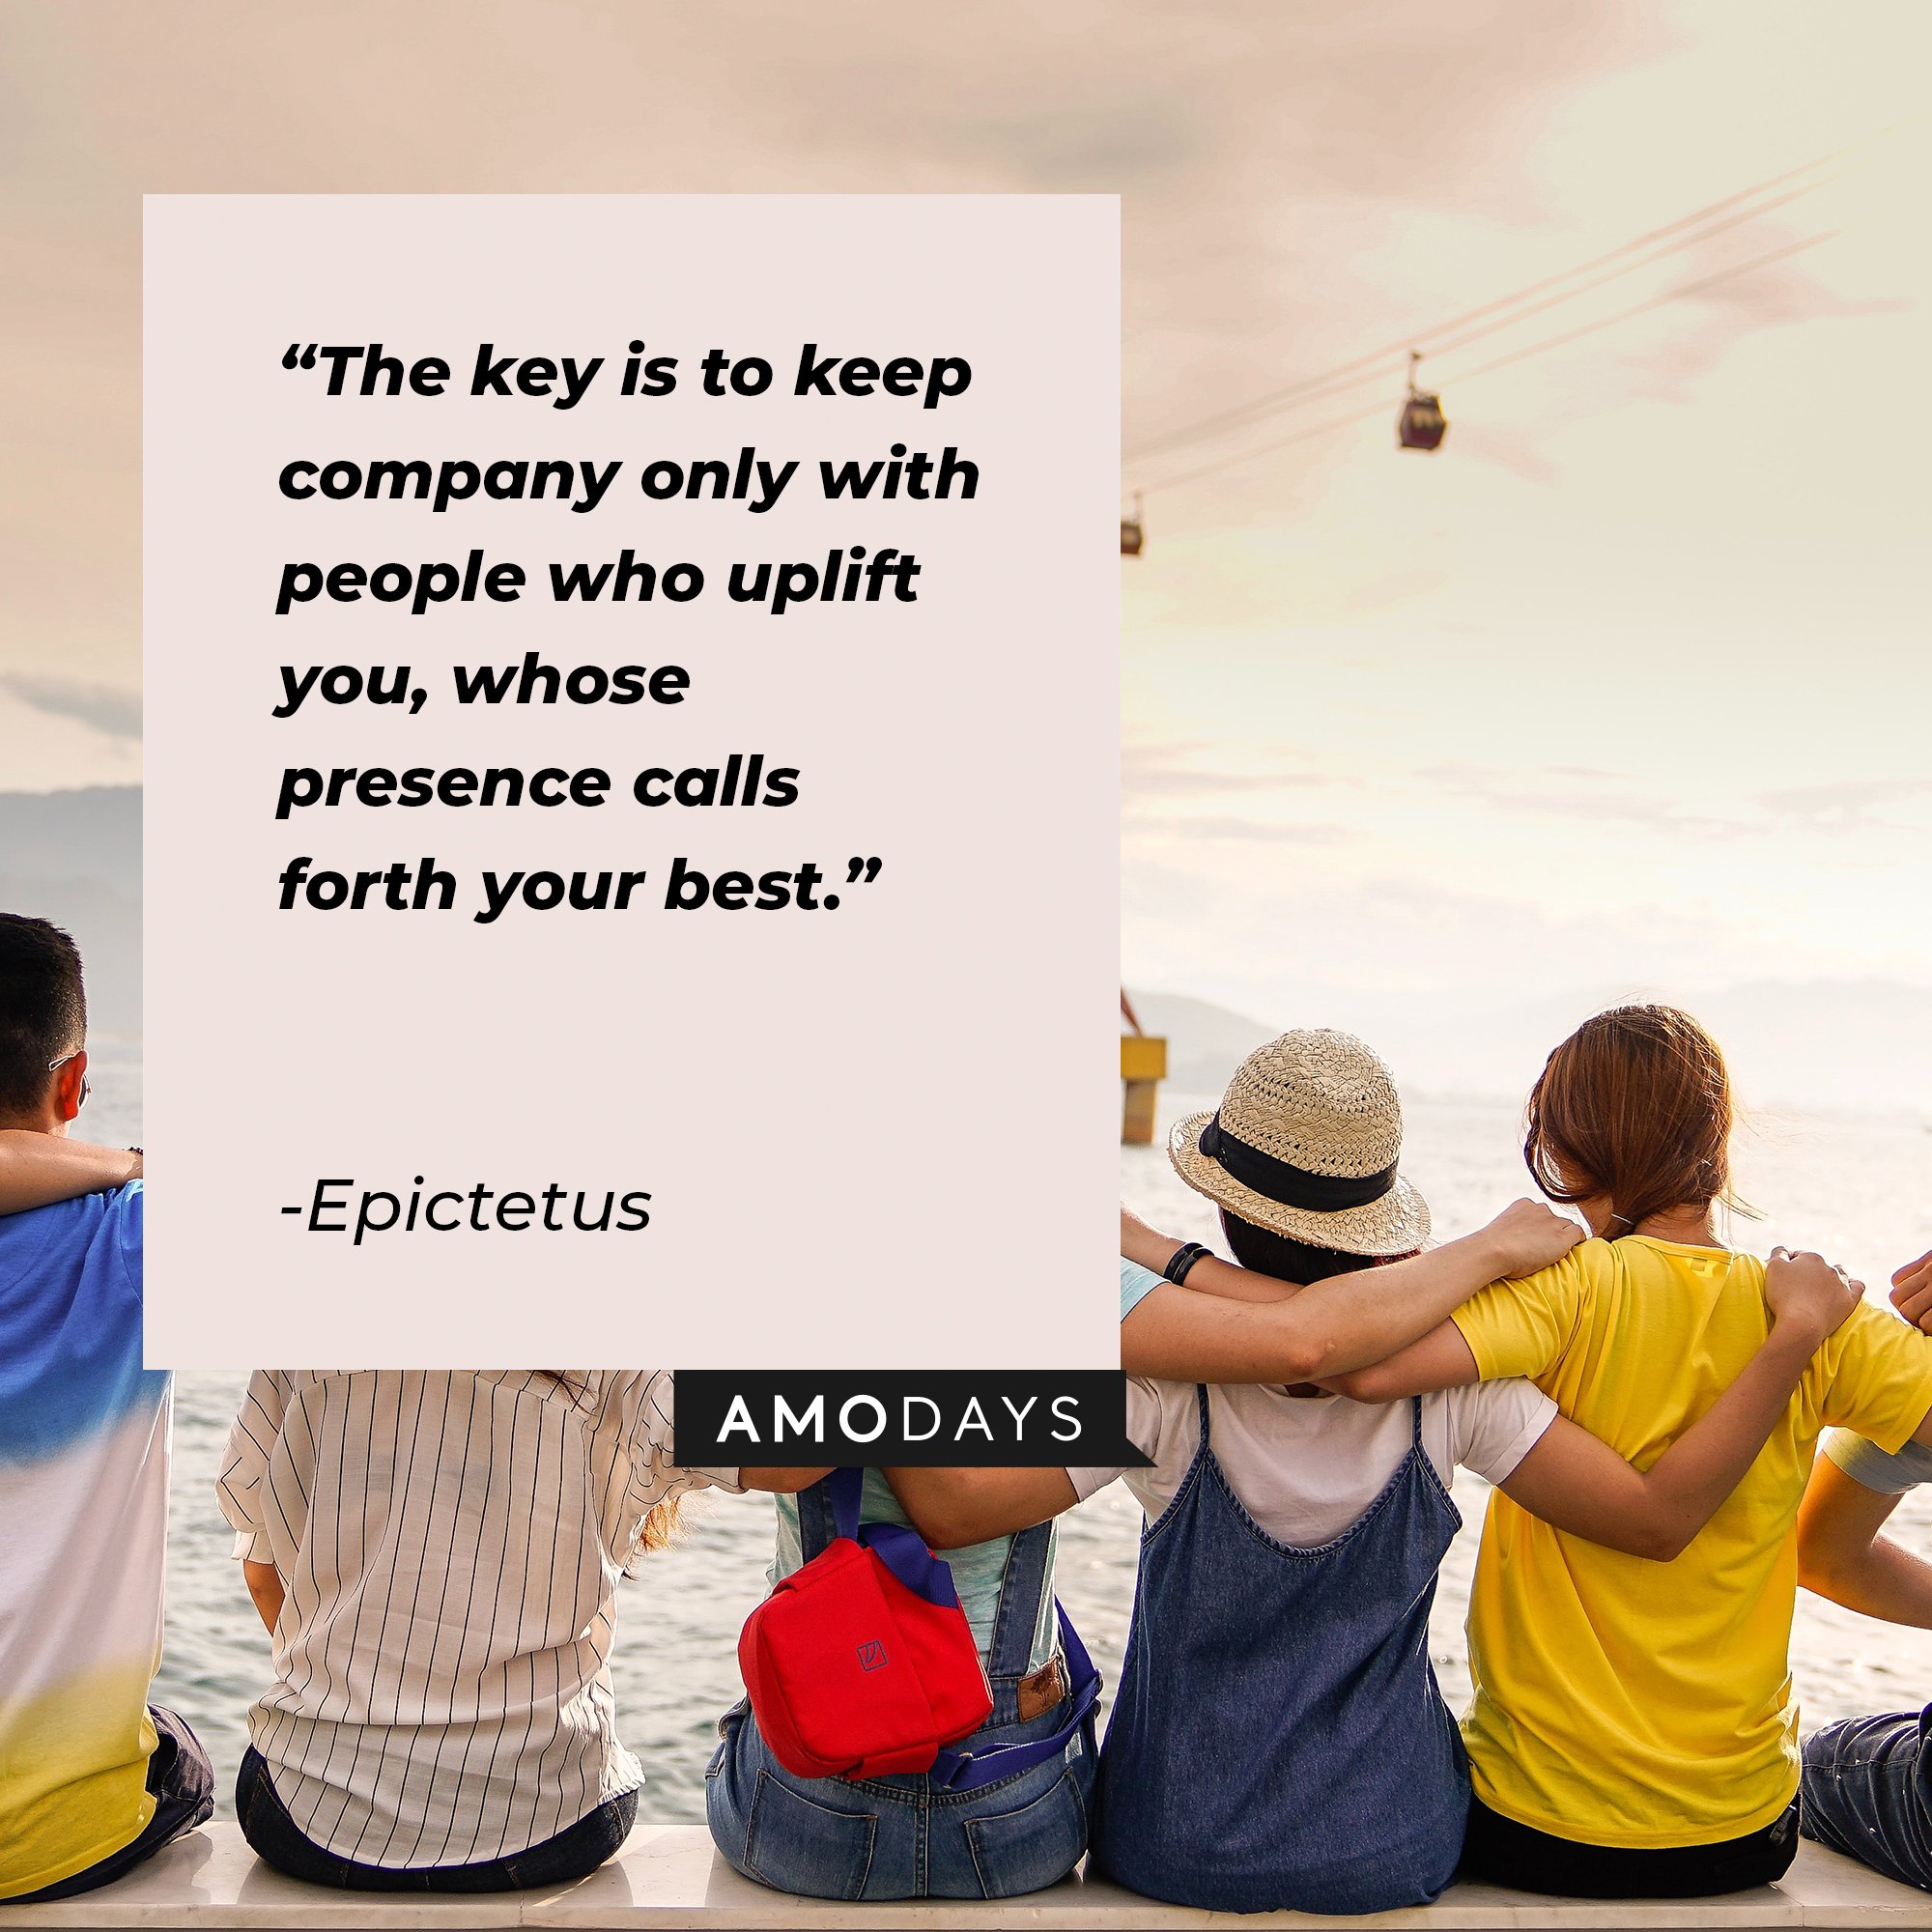 Epictetus’ quote: “The key is to keep company only with people who uplift you, whose presence calls forth your best.” | Image: AmoDays